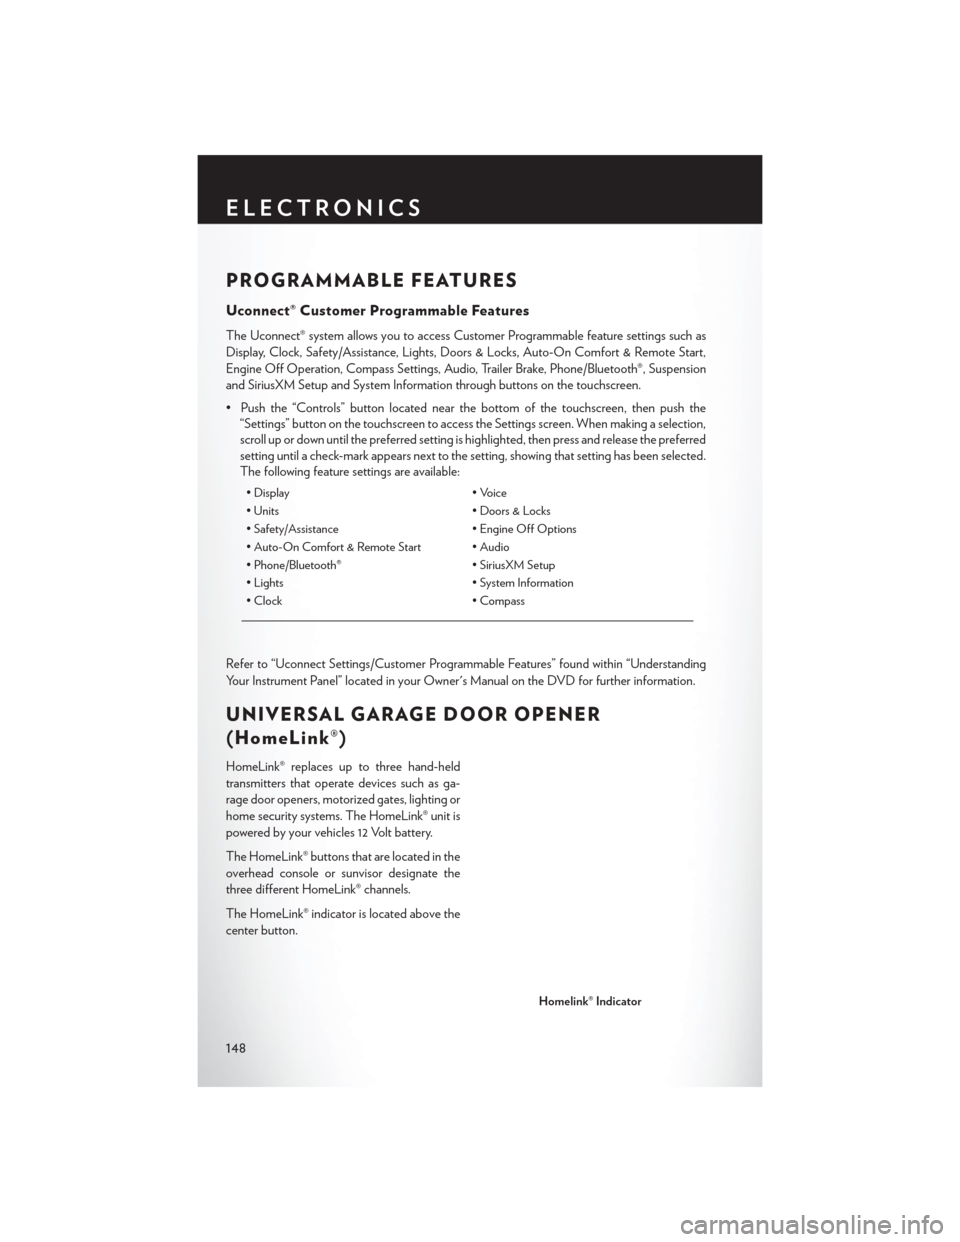 CHRYSLER 200 2015 2.G User Guide PROGRAMMABLE FEATURES
Uconnect® Customer Programmable Features
The Uconnect® system allows you to access Customer Programmable feature settings such as
Display, Clock, Safety/Assistance, Lights, Doo